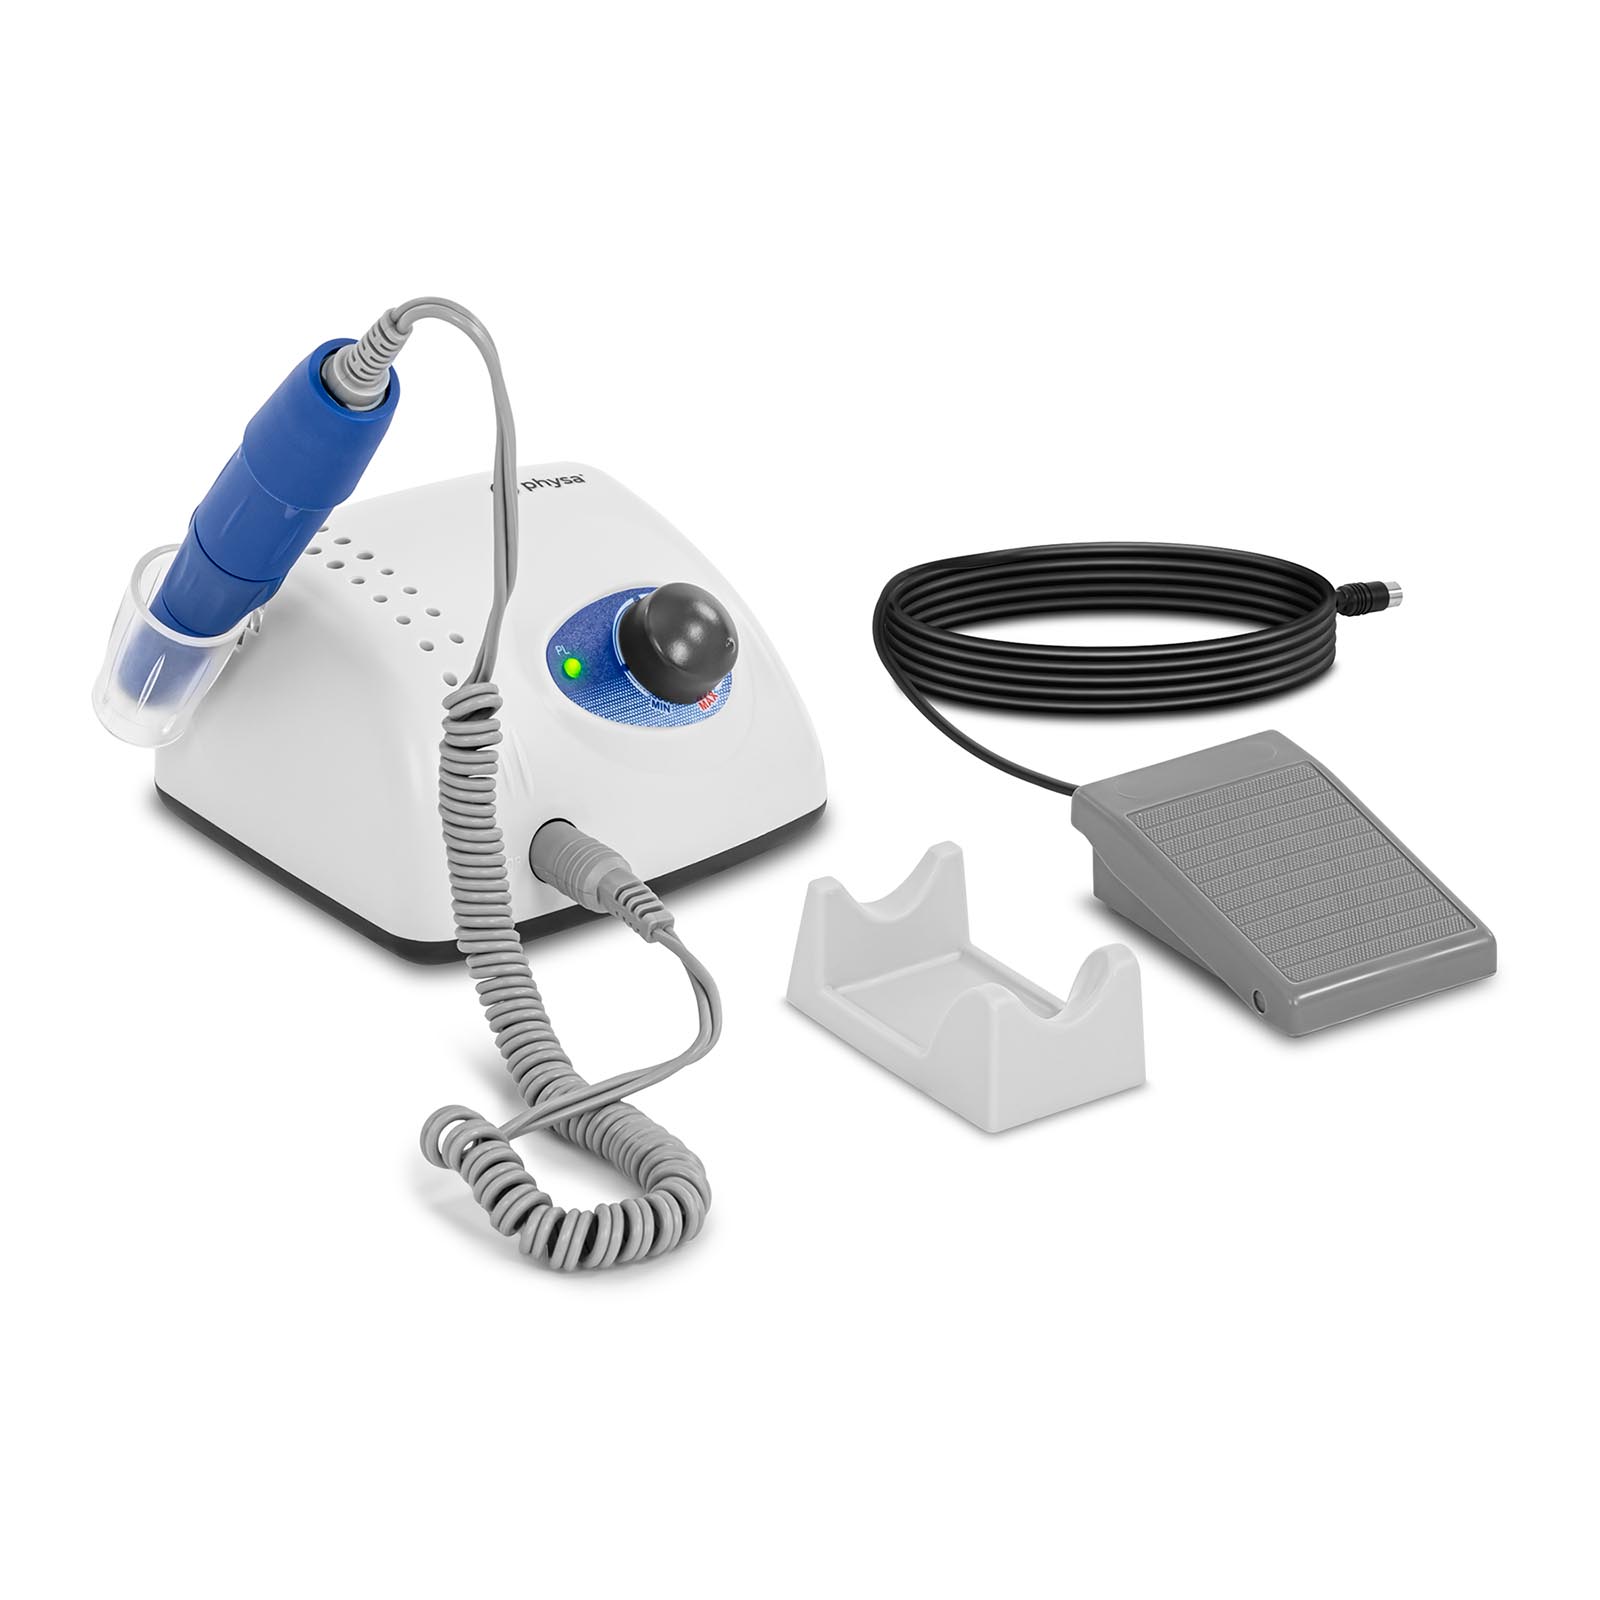 Nail cutter - 35 000 rpm - stepless - 2 directions